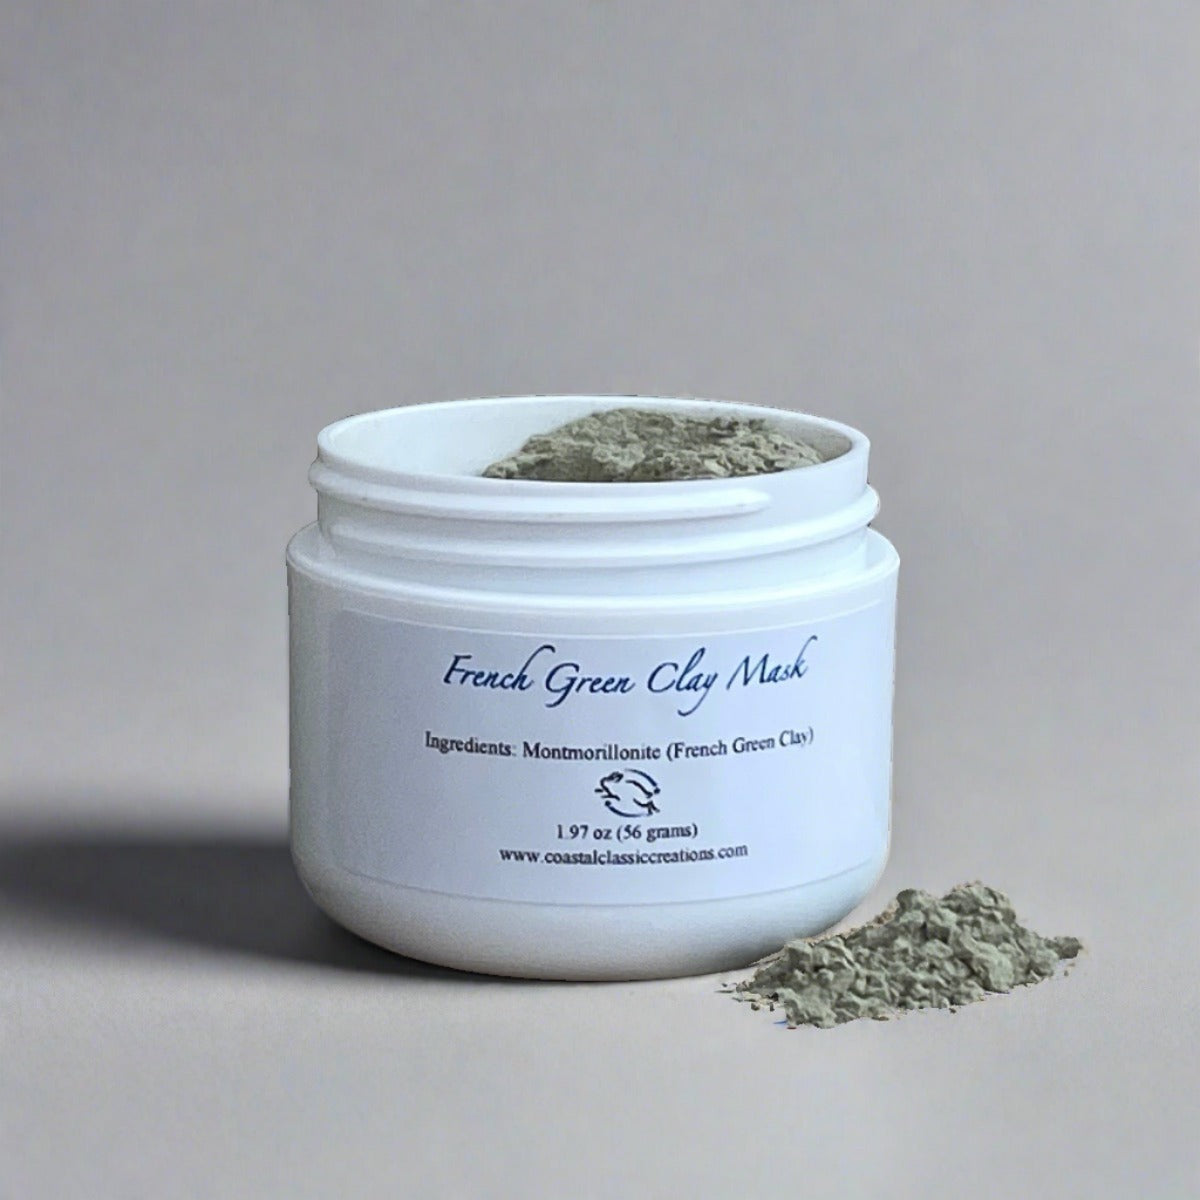 White jar of French green clay for purifying and detoxifying the skin